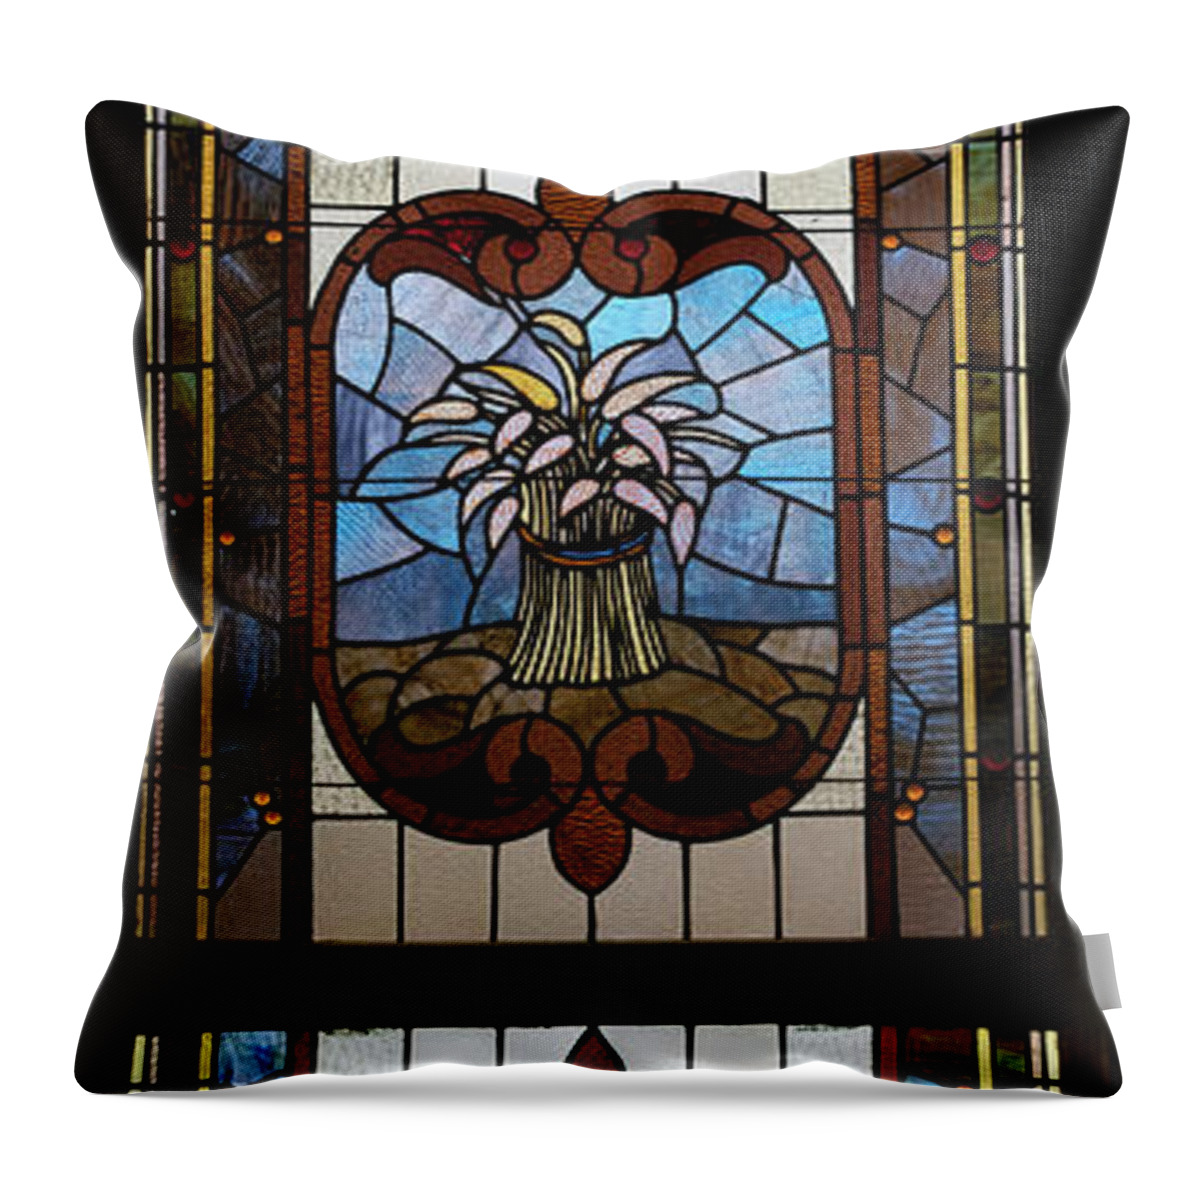 Composite Throw Pillow featuring the photograph Stained Glass 3 Panel Vertical Composite 04 by Thomas Woolworth